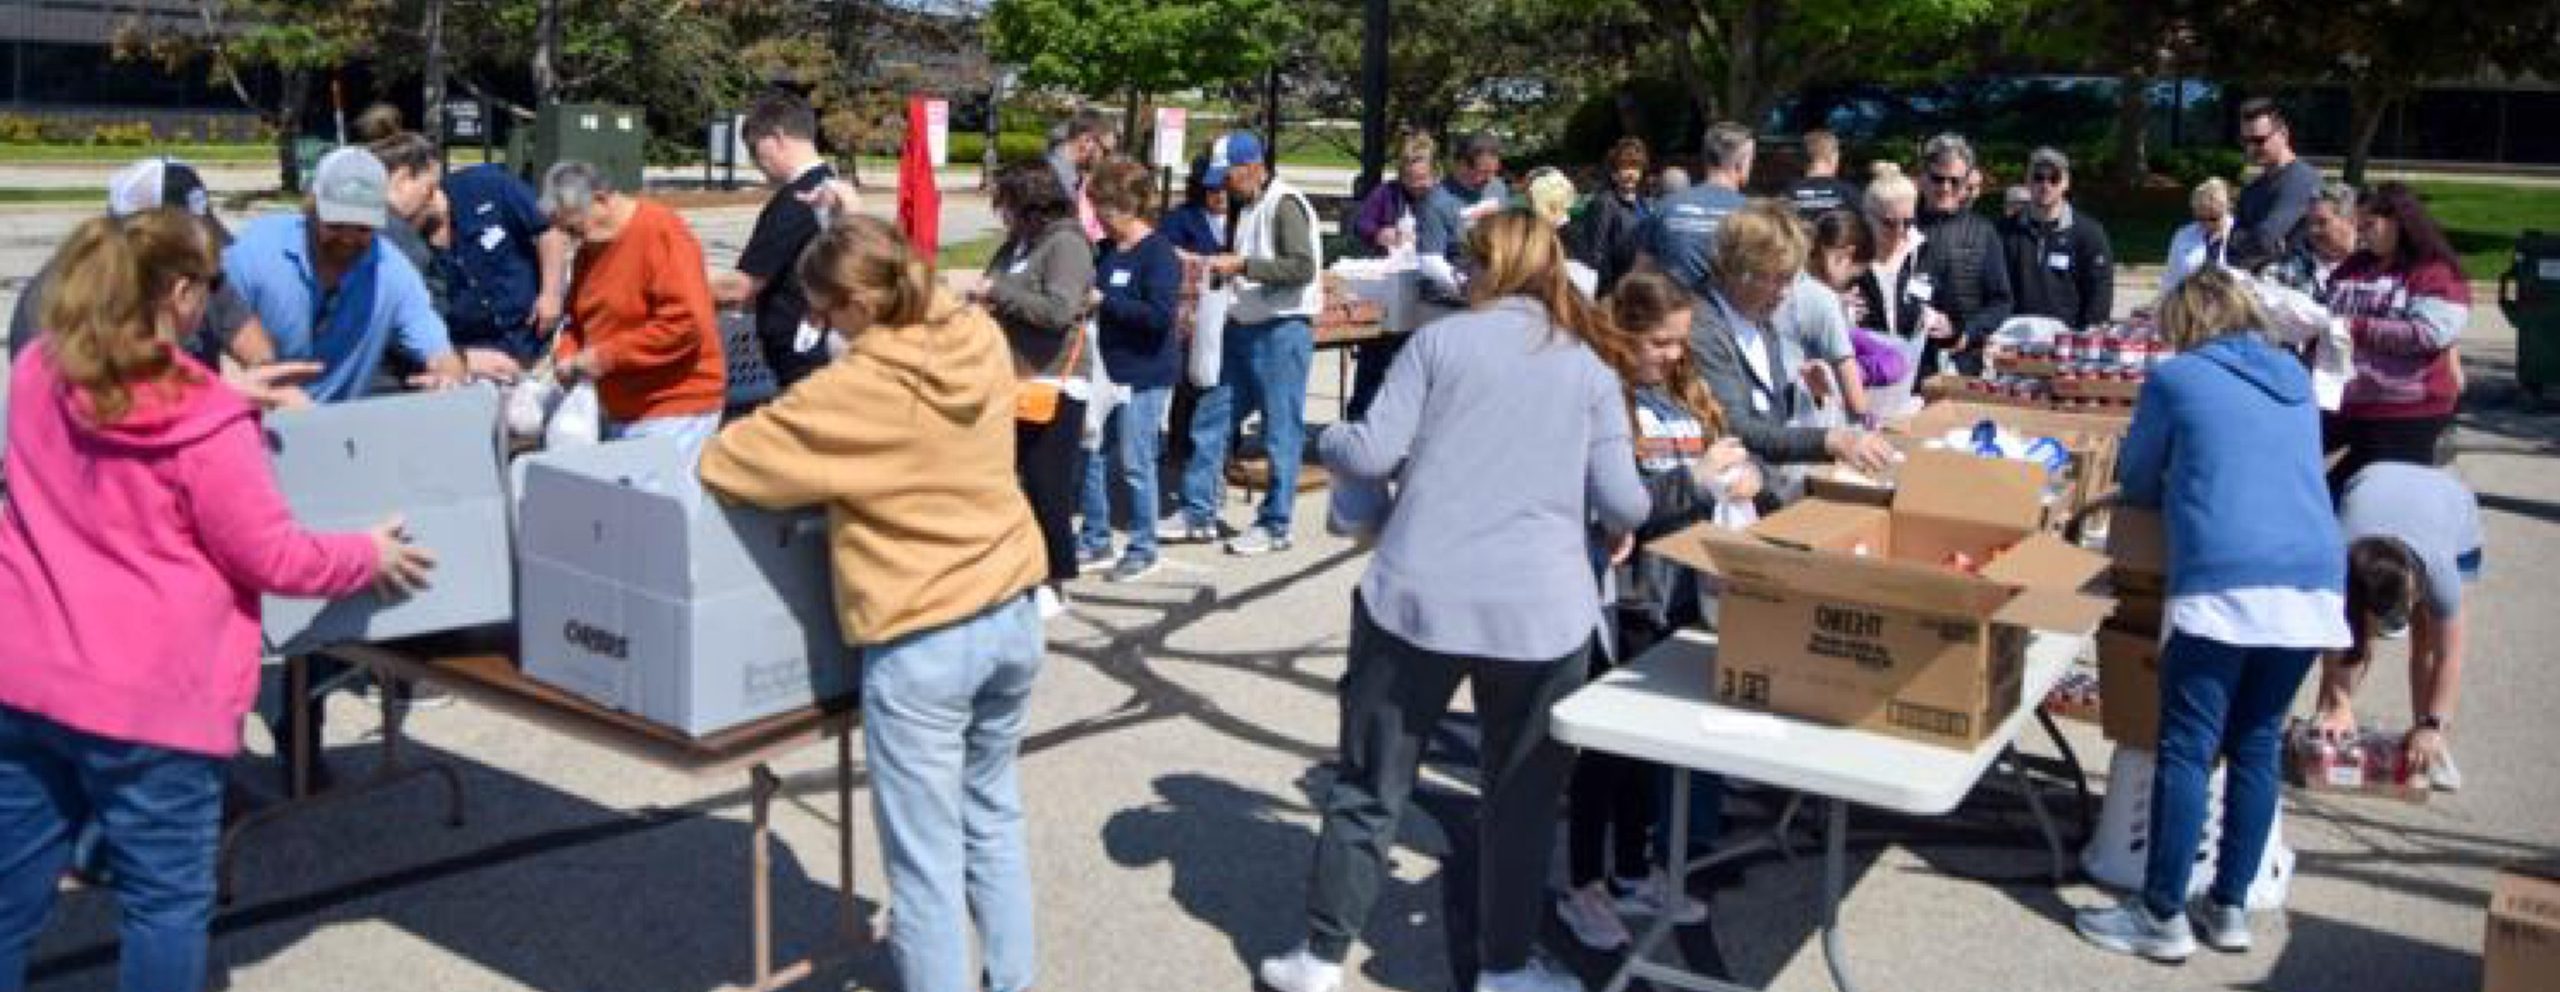 Blessings in a Backpack Waukesha County Chapter Hosts Volunteer Event